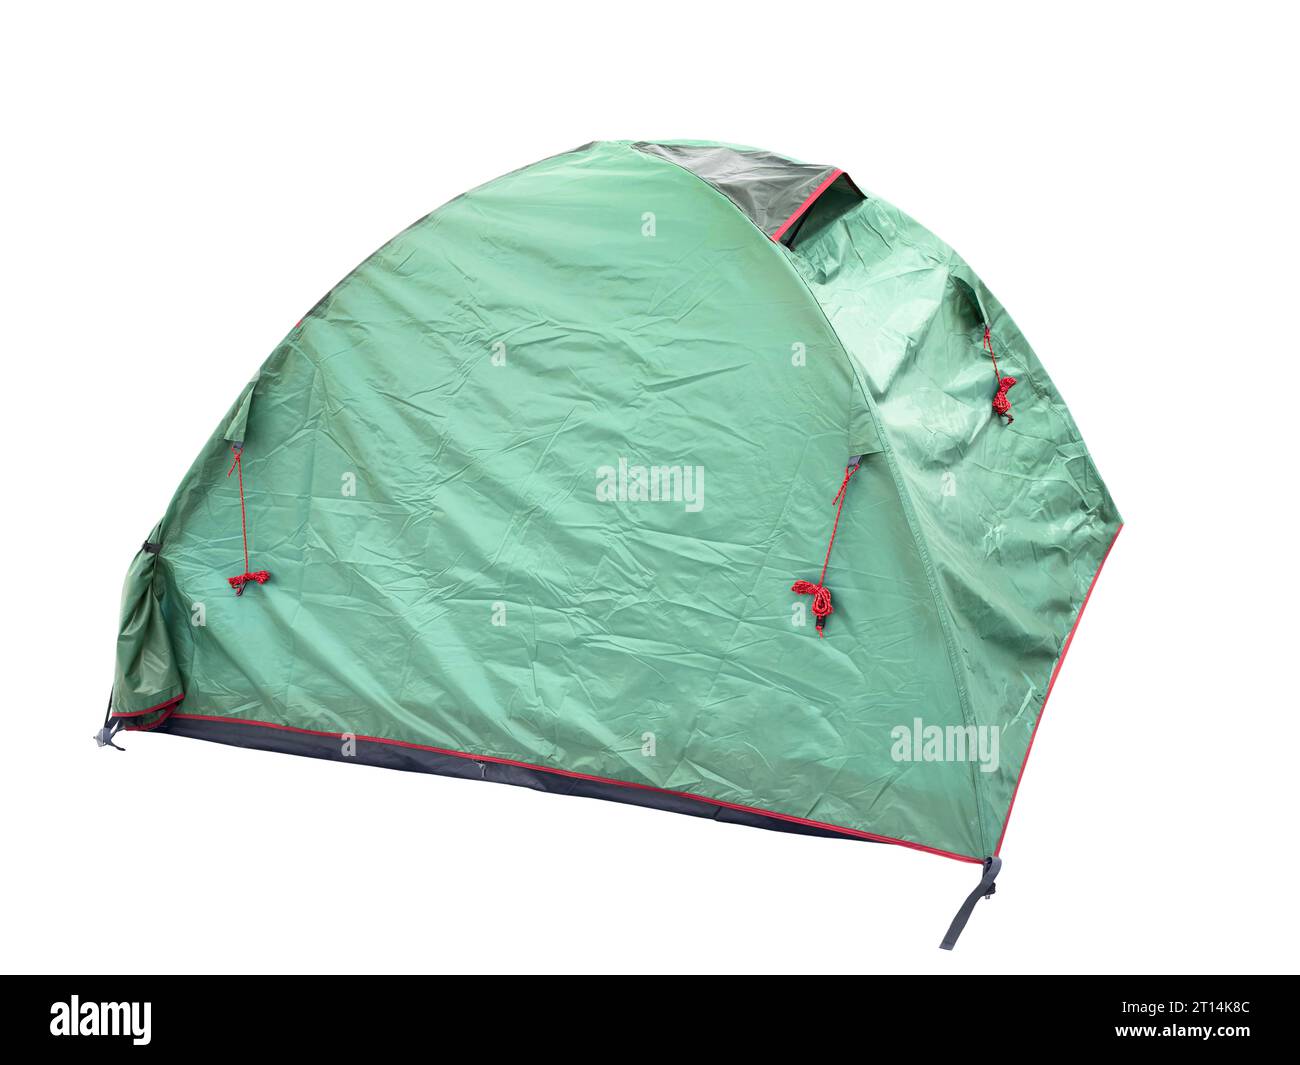 Camping tent isolated on the white background. Camping tent or Tourist tent Isolated. Colourful dome tent camping. Travel equipment. Stock Photo